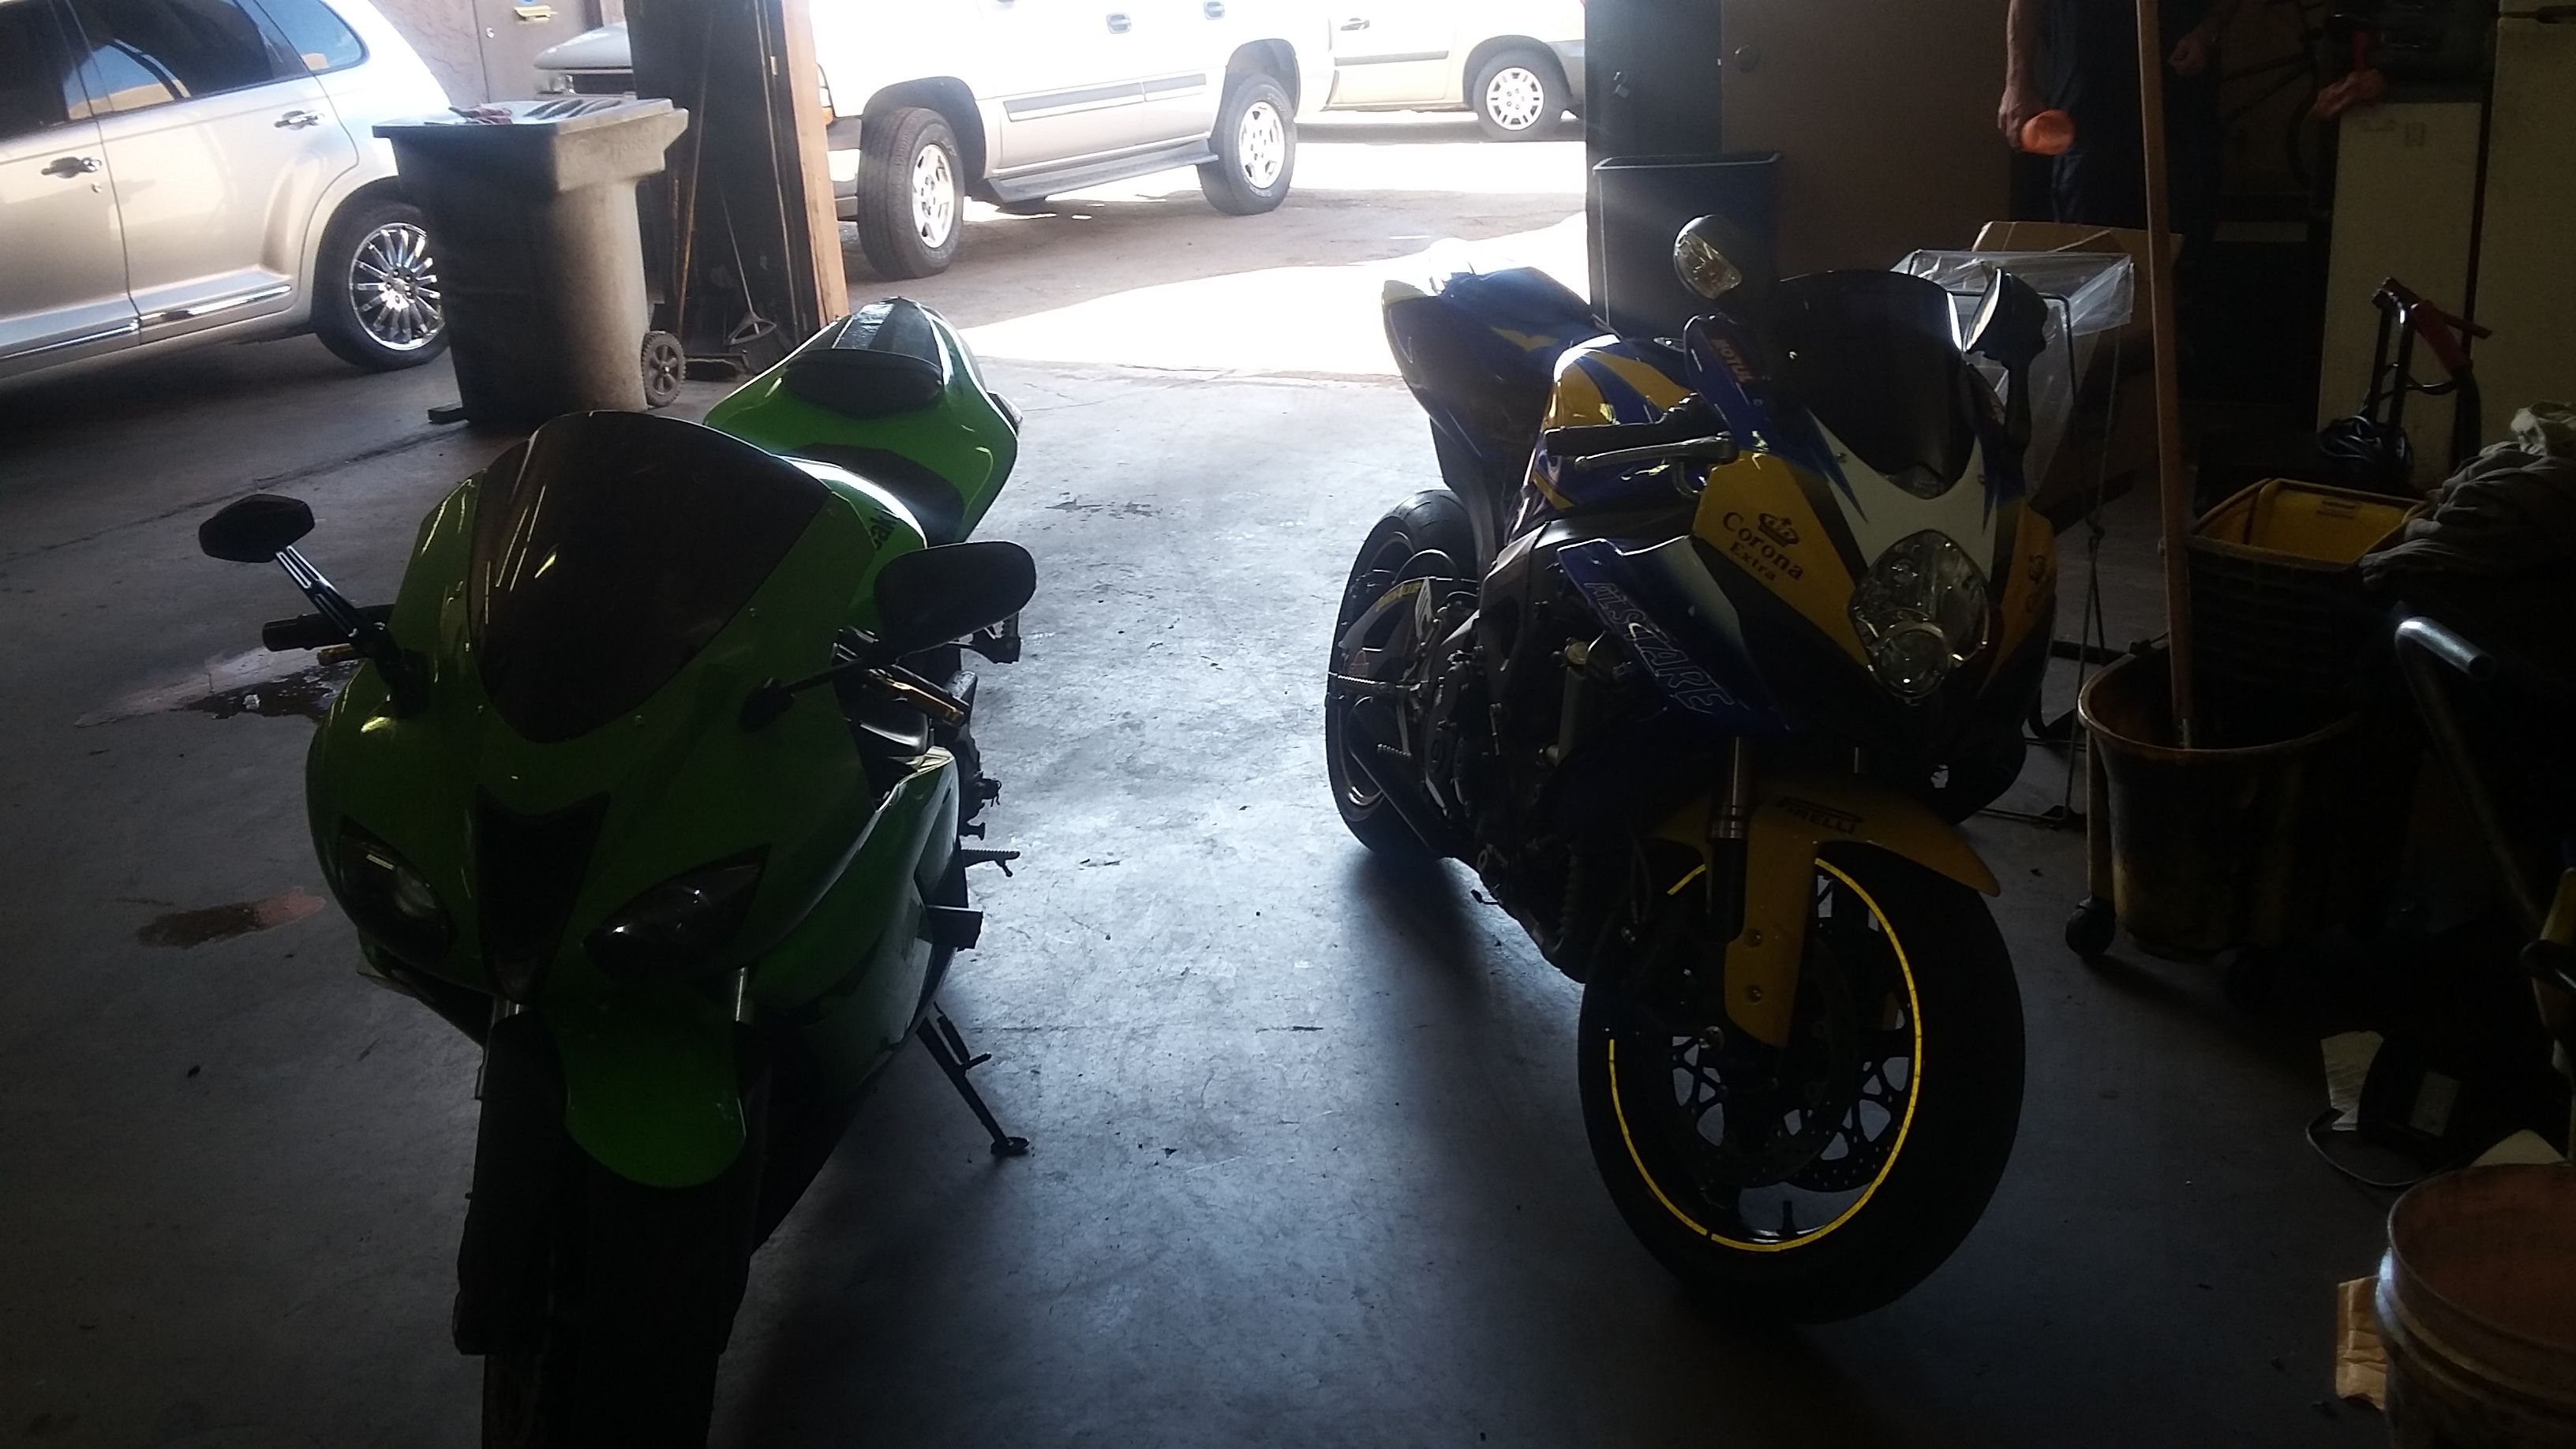 my zx6r and gsxr 1000 in the shop at work